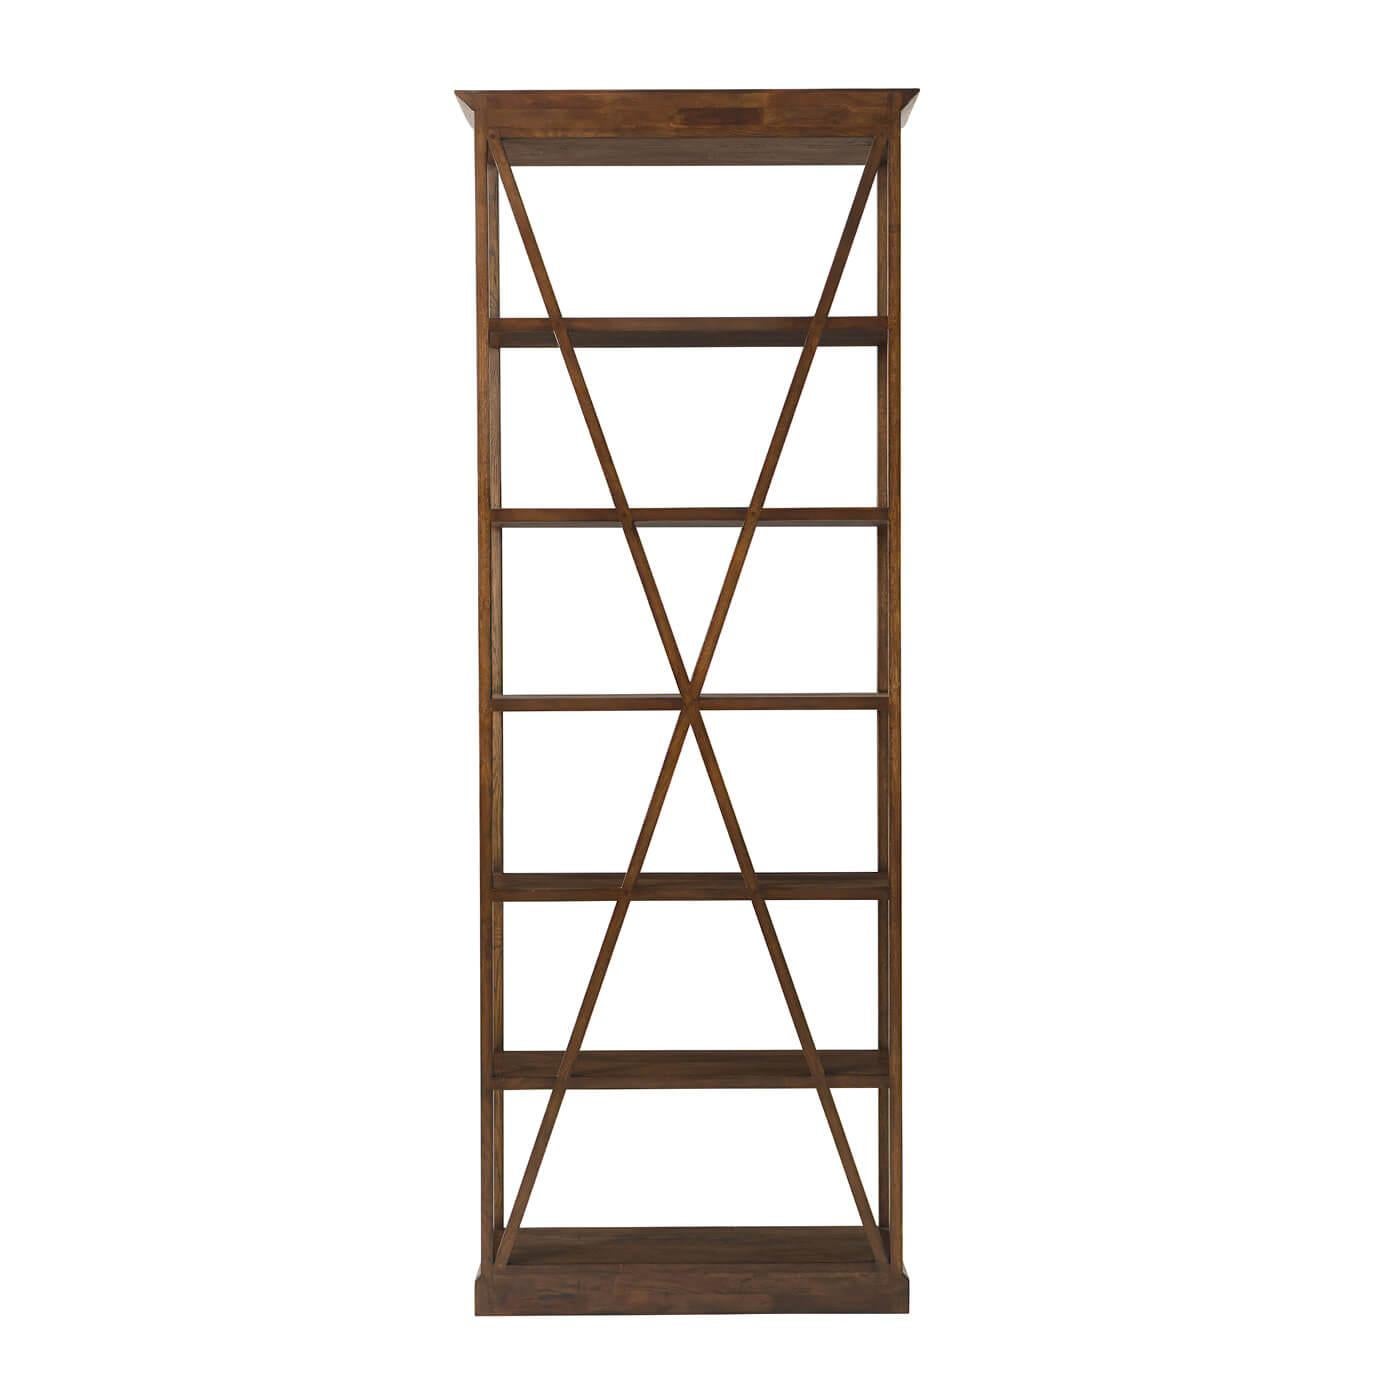 A modern rustic-style dark oak etagere with five oak-crafted display shelves firmly supported by a crossed 